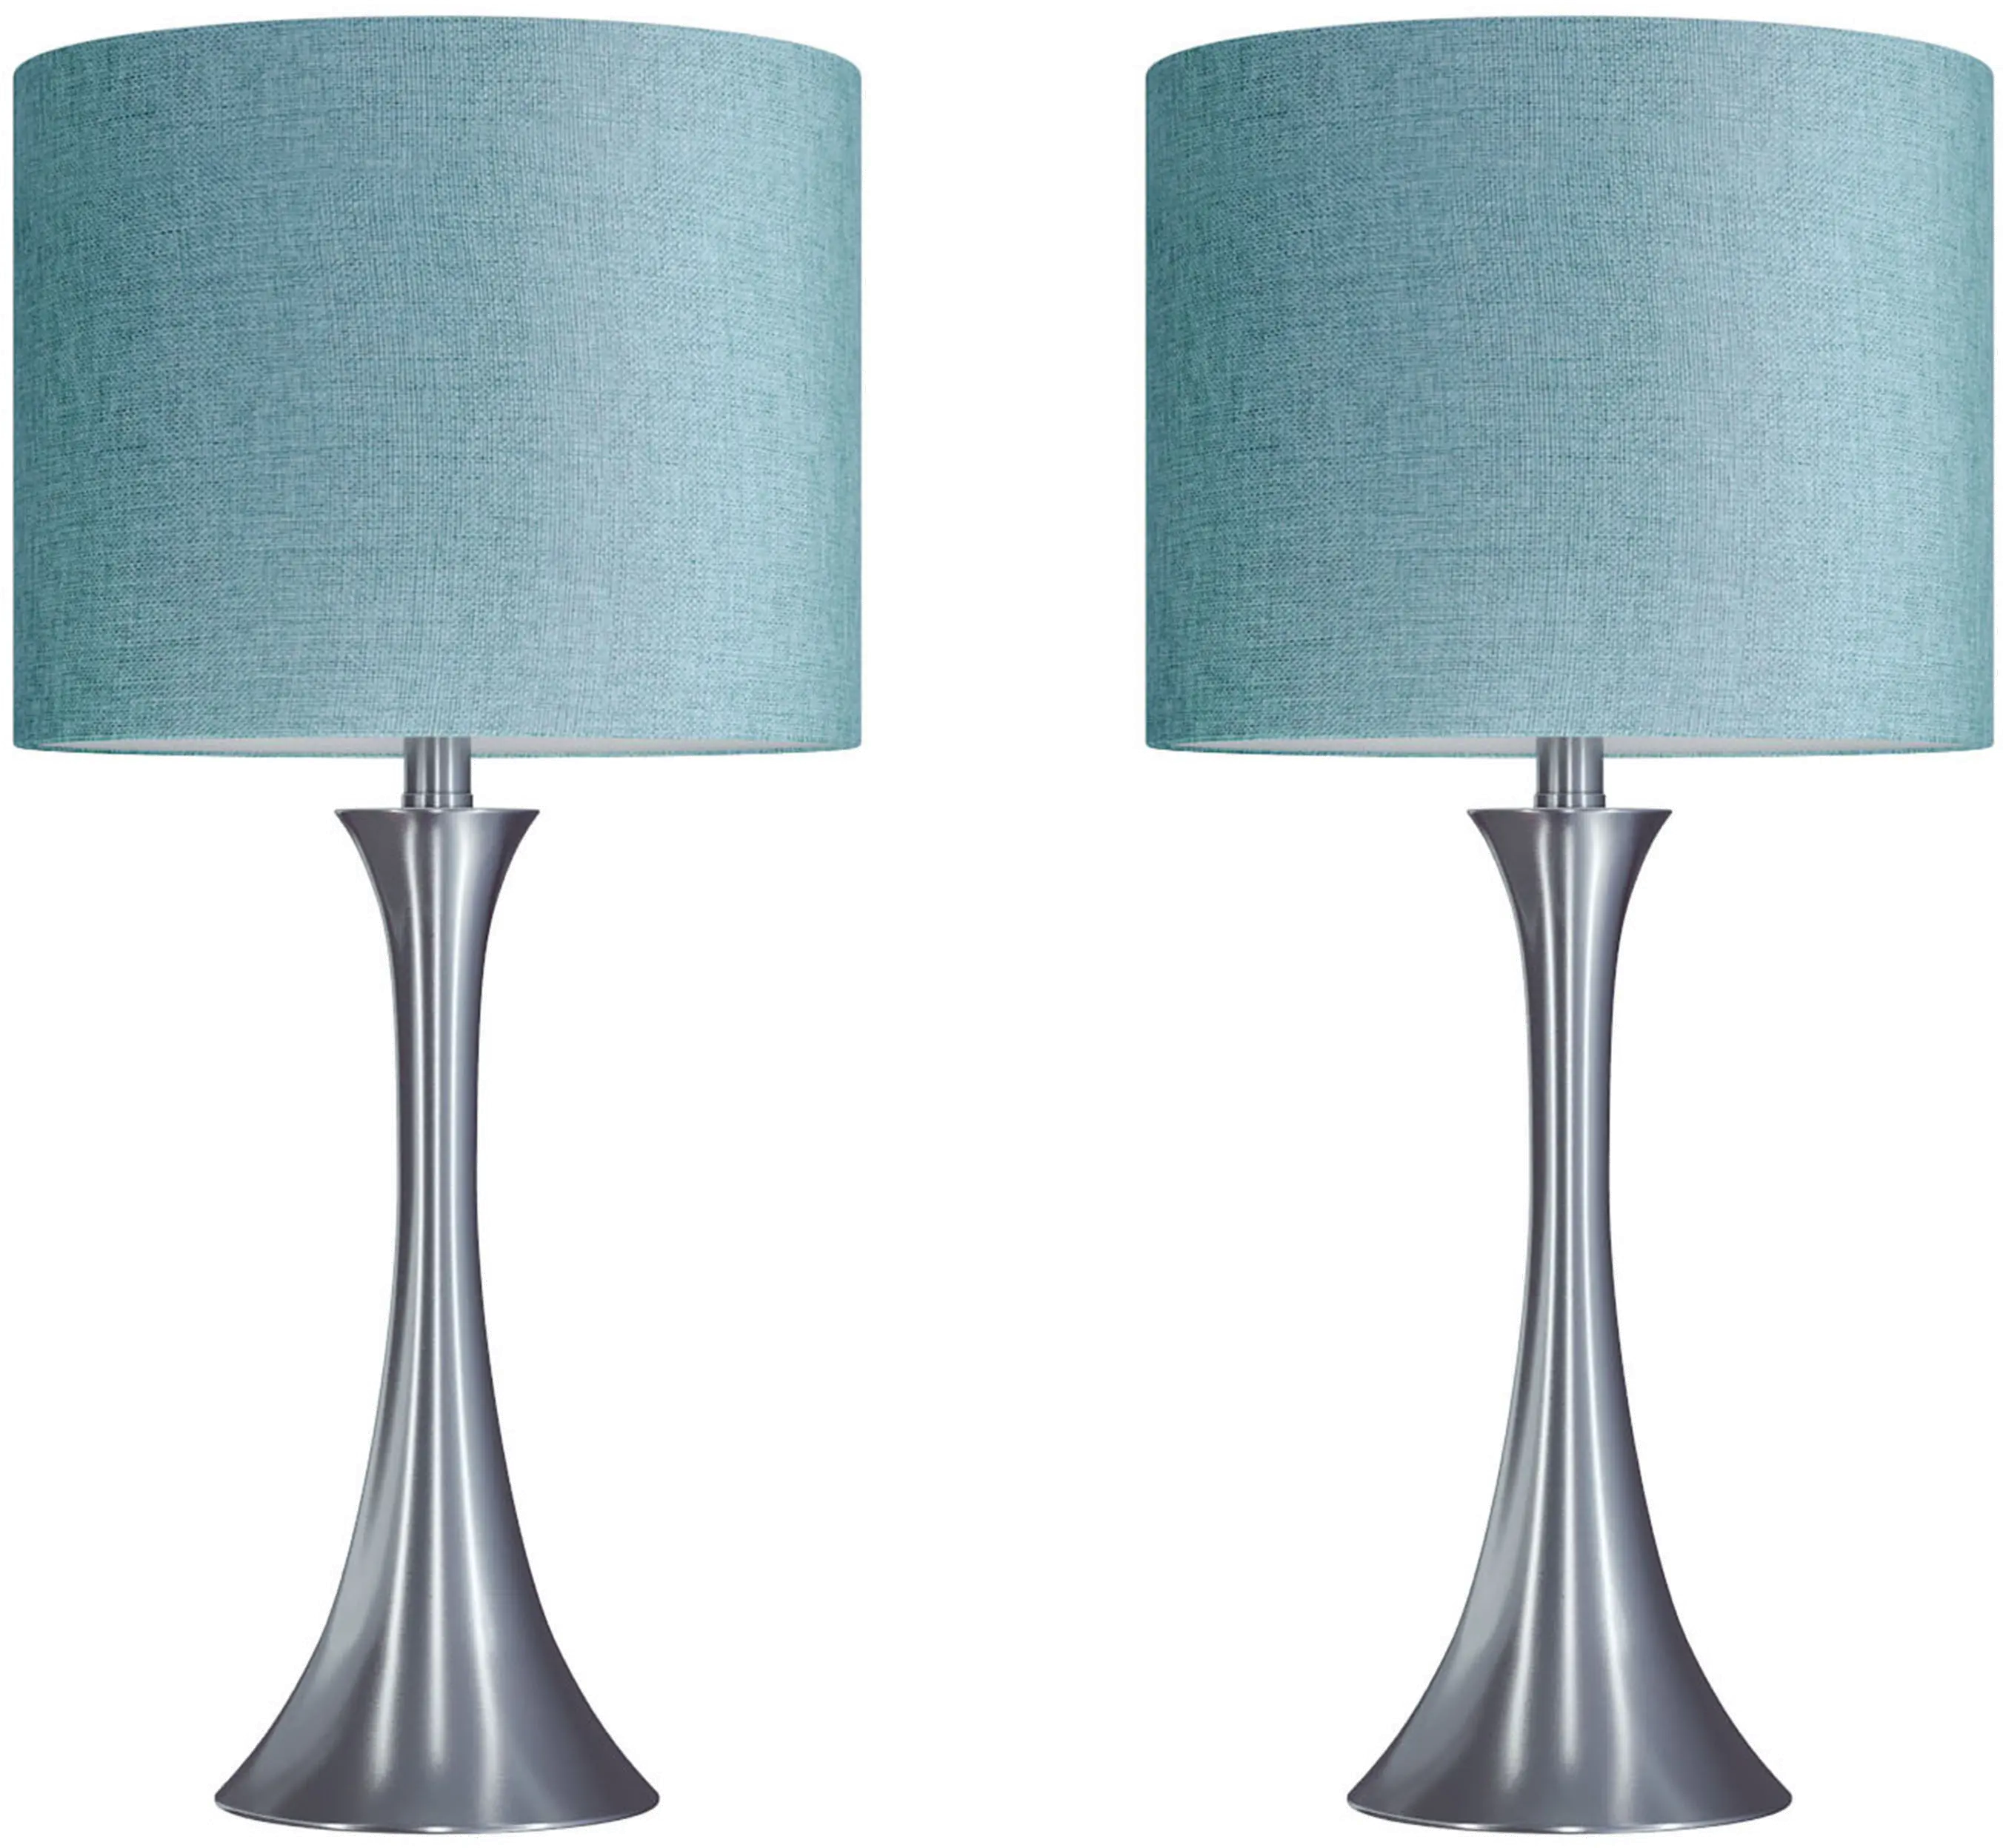 TL24-LENUXE-DBLNITQ2 Lenuxe Nickel Table Lamps with Turquoise Shades, S sku TL24-LENUXE-DBLNITQ2